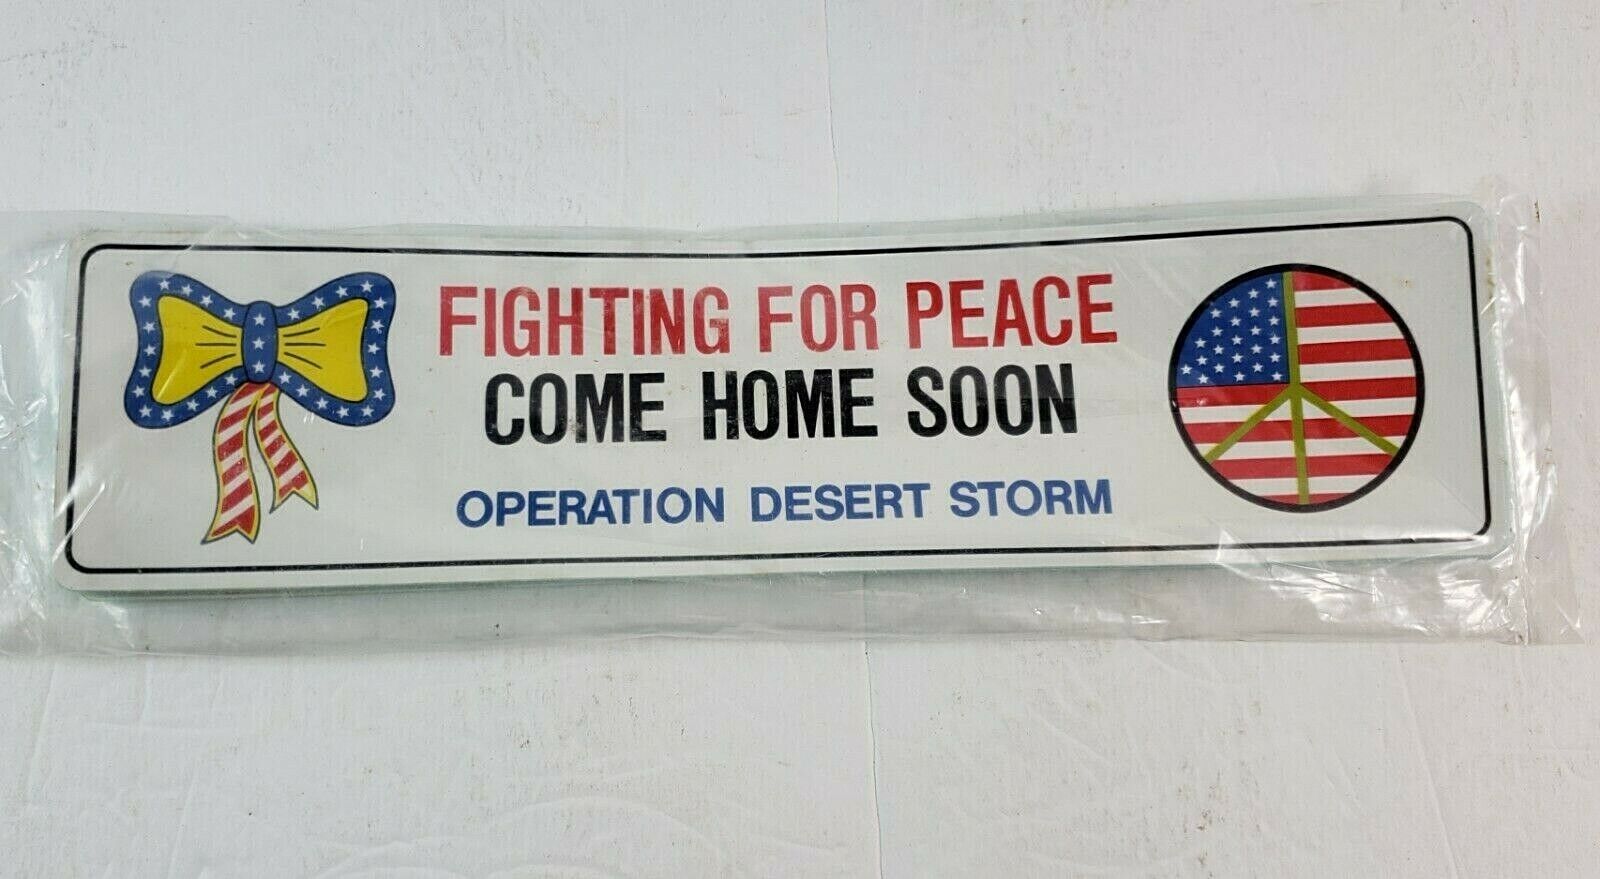 Lot 20+ 1990 Operation Desert Storm Fighting for Peace Bumper Stickers 12